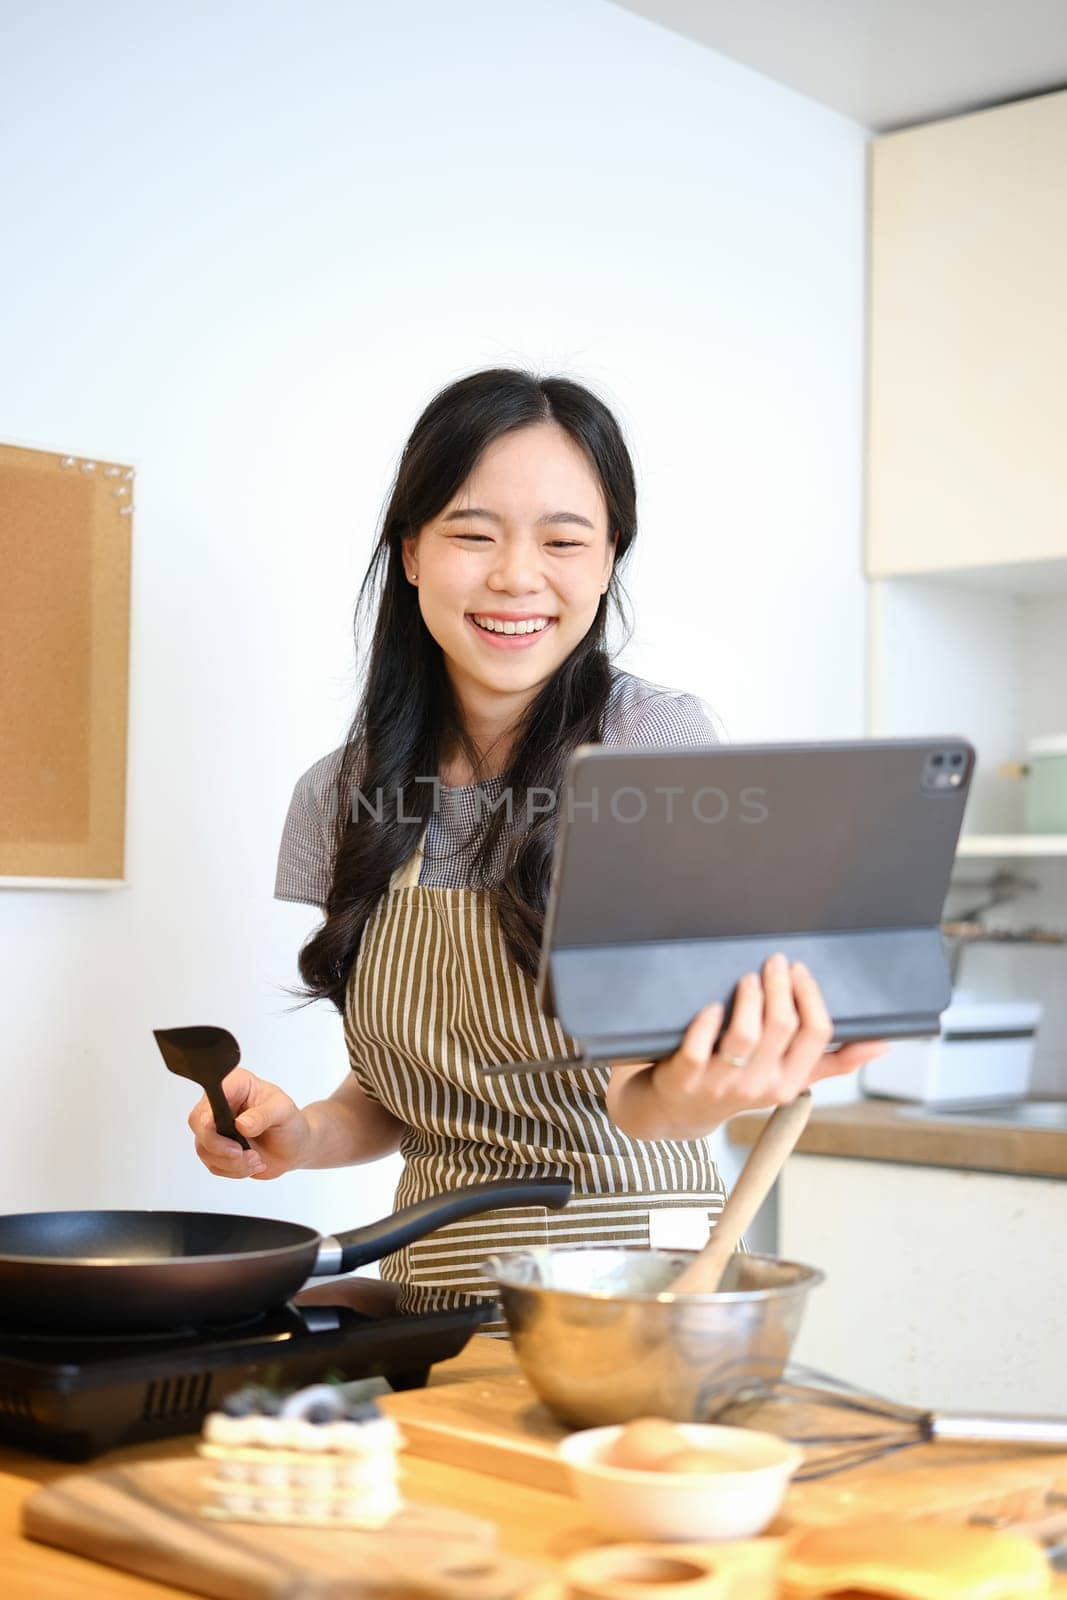 Cheerful asian housewife cooking at home and following an online recipe on digital tablet. People, technology and lifestyle.